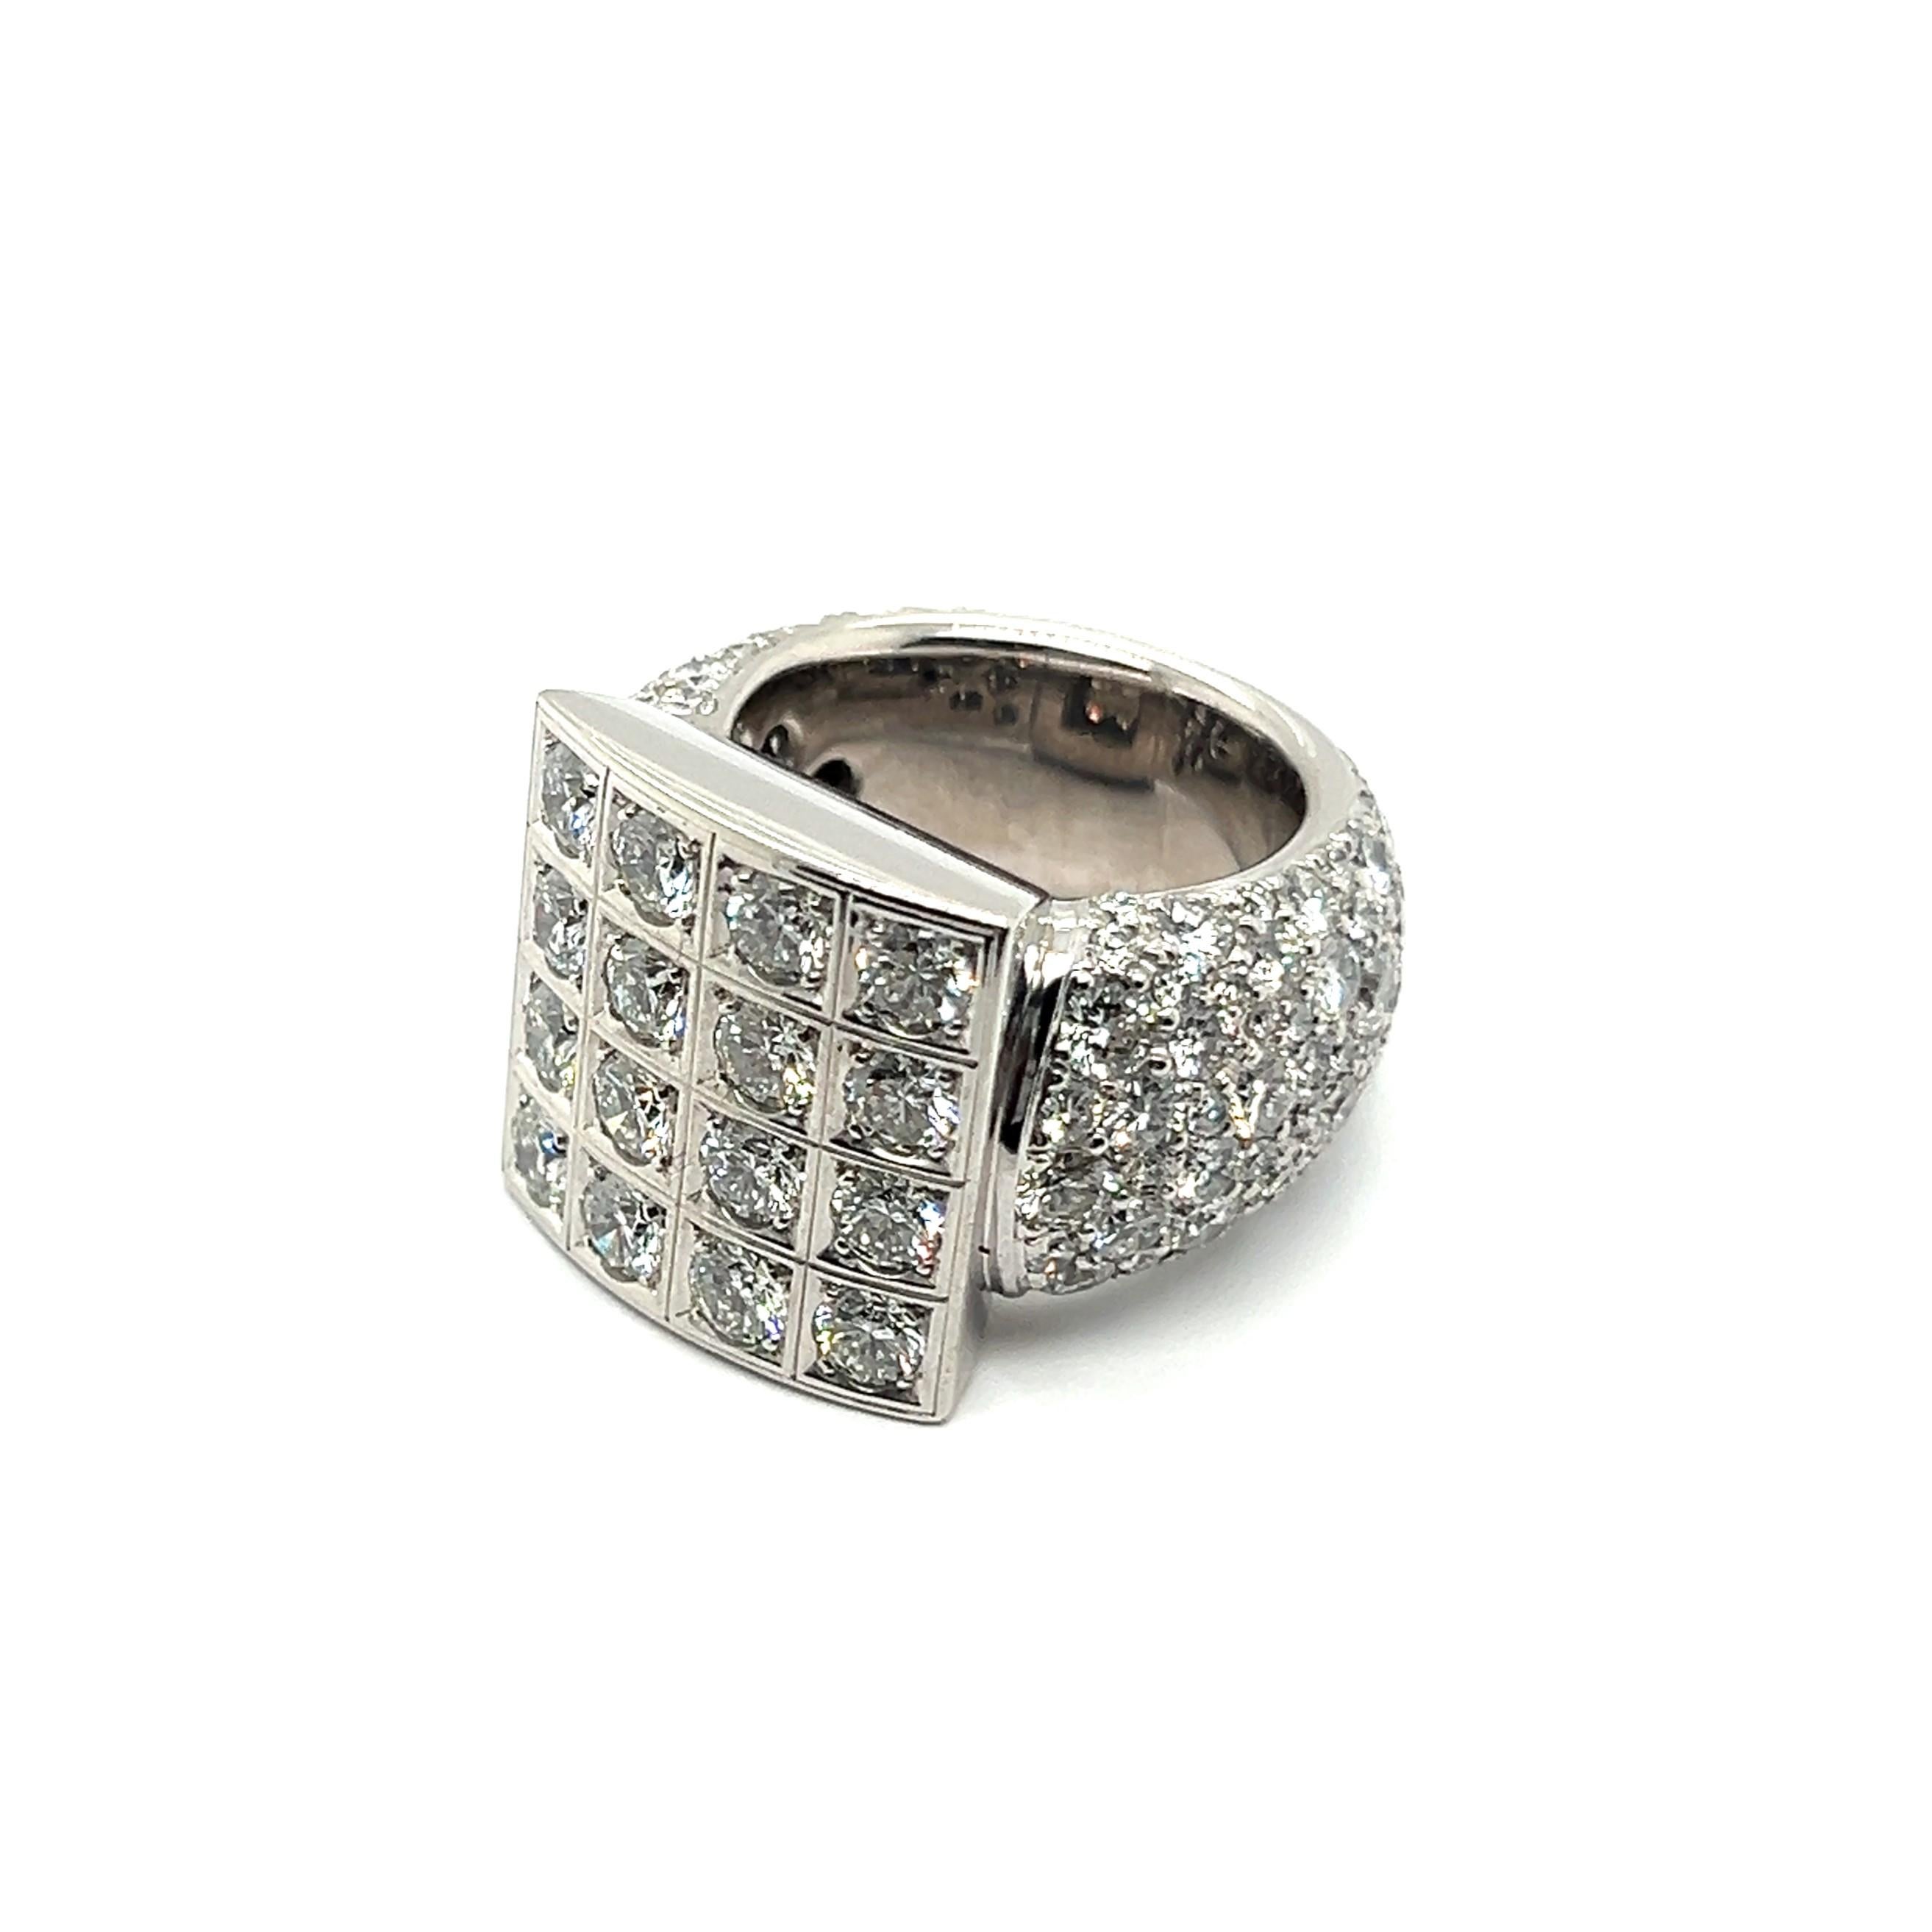 Bold Graphic Ring with Diamonds in 18 Karat White Gold by Majo Fruithof In Excellent Condition For Sale In Lucerne, CH